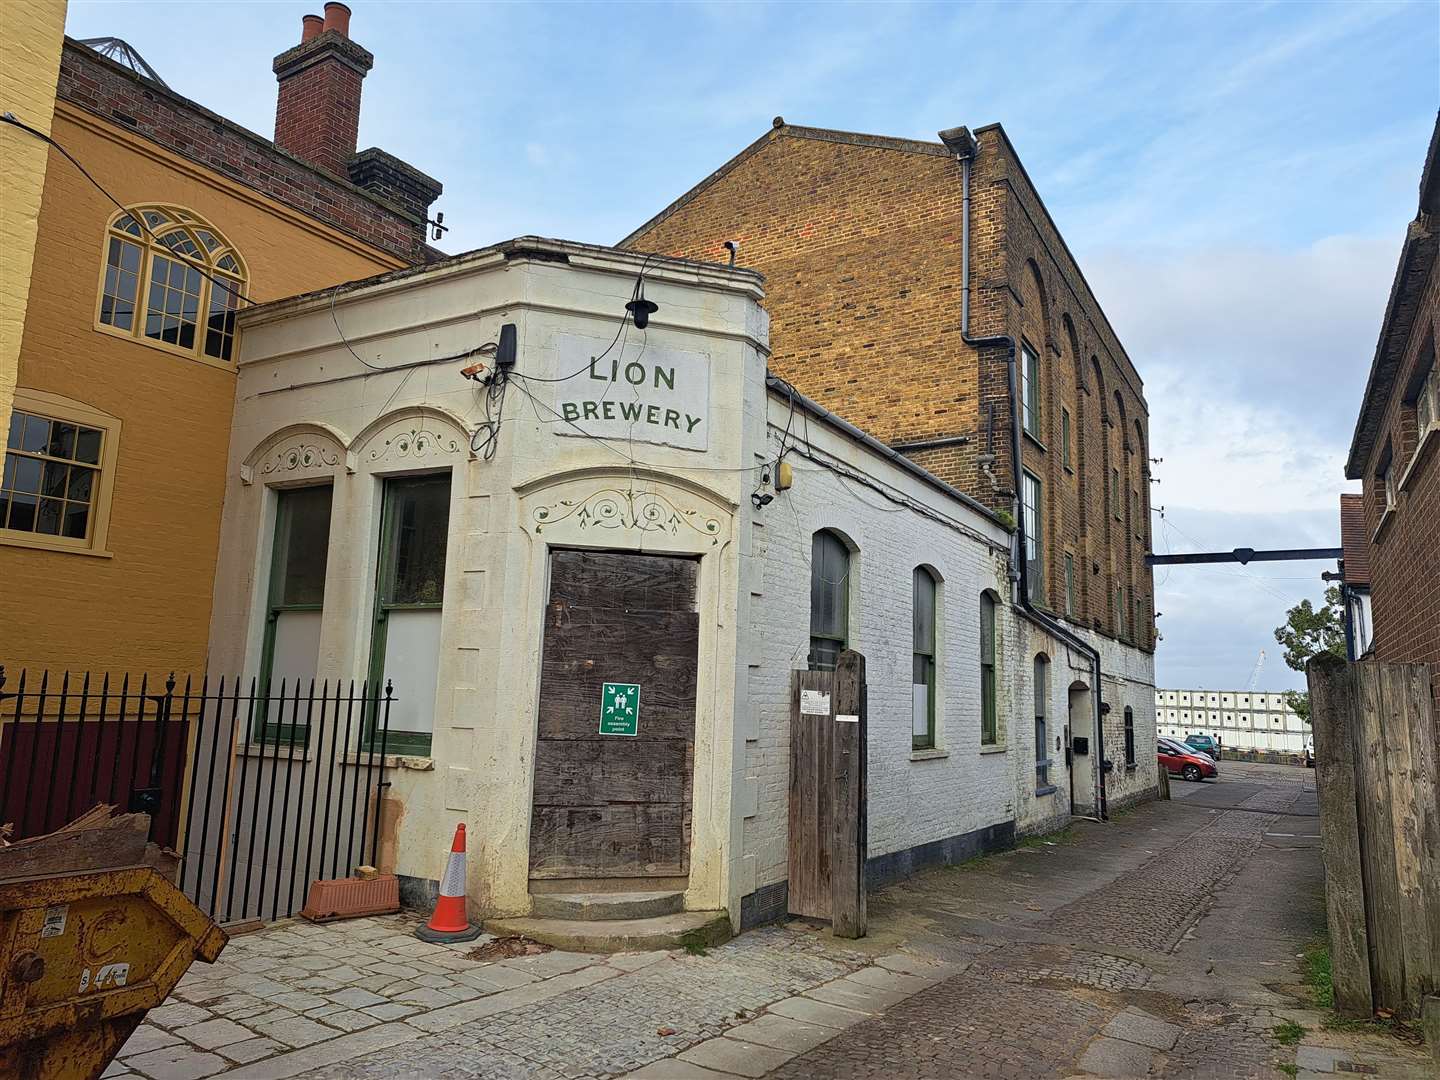 The Hulkes Lane Brewery Buildings were given listed status by Historic England